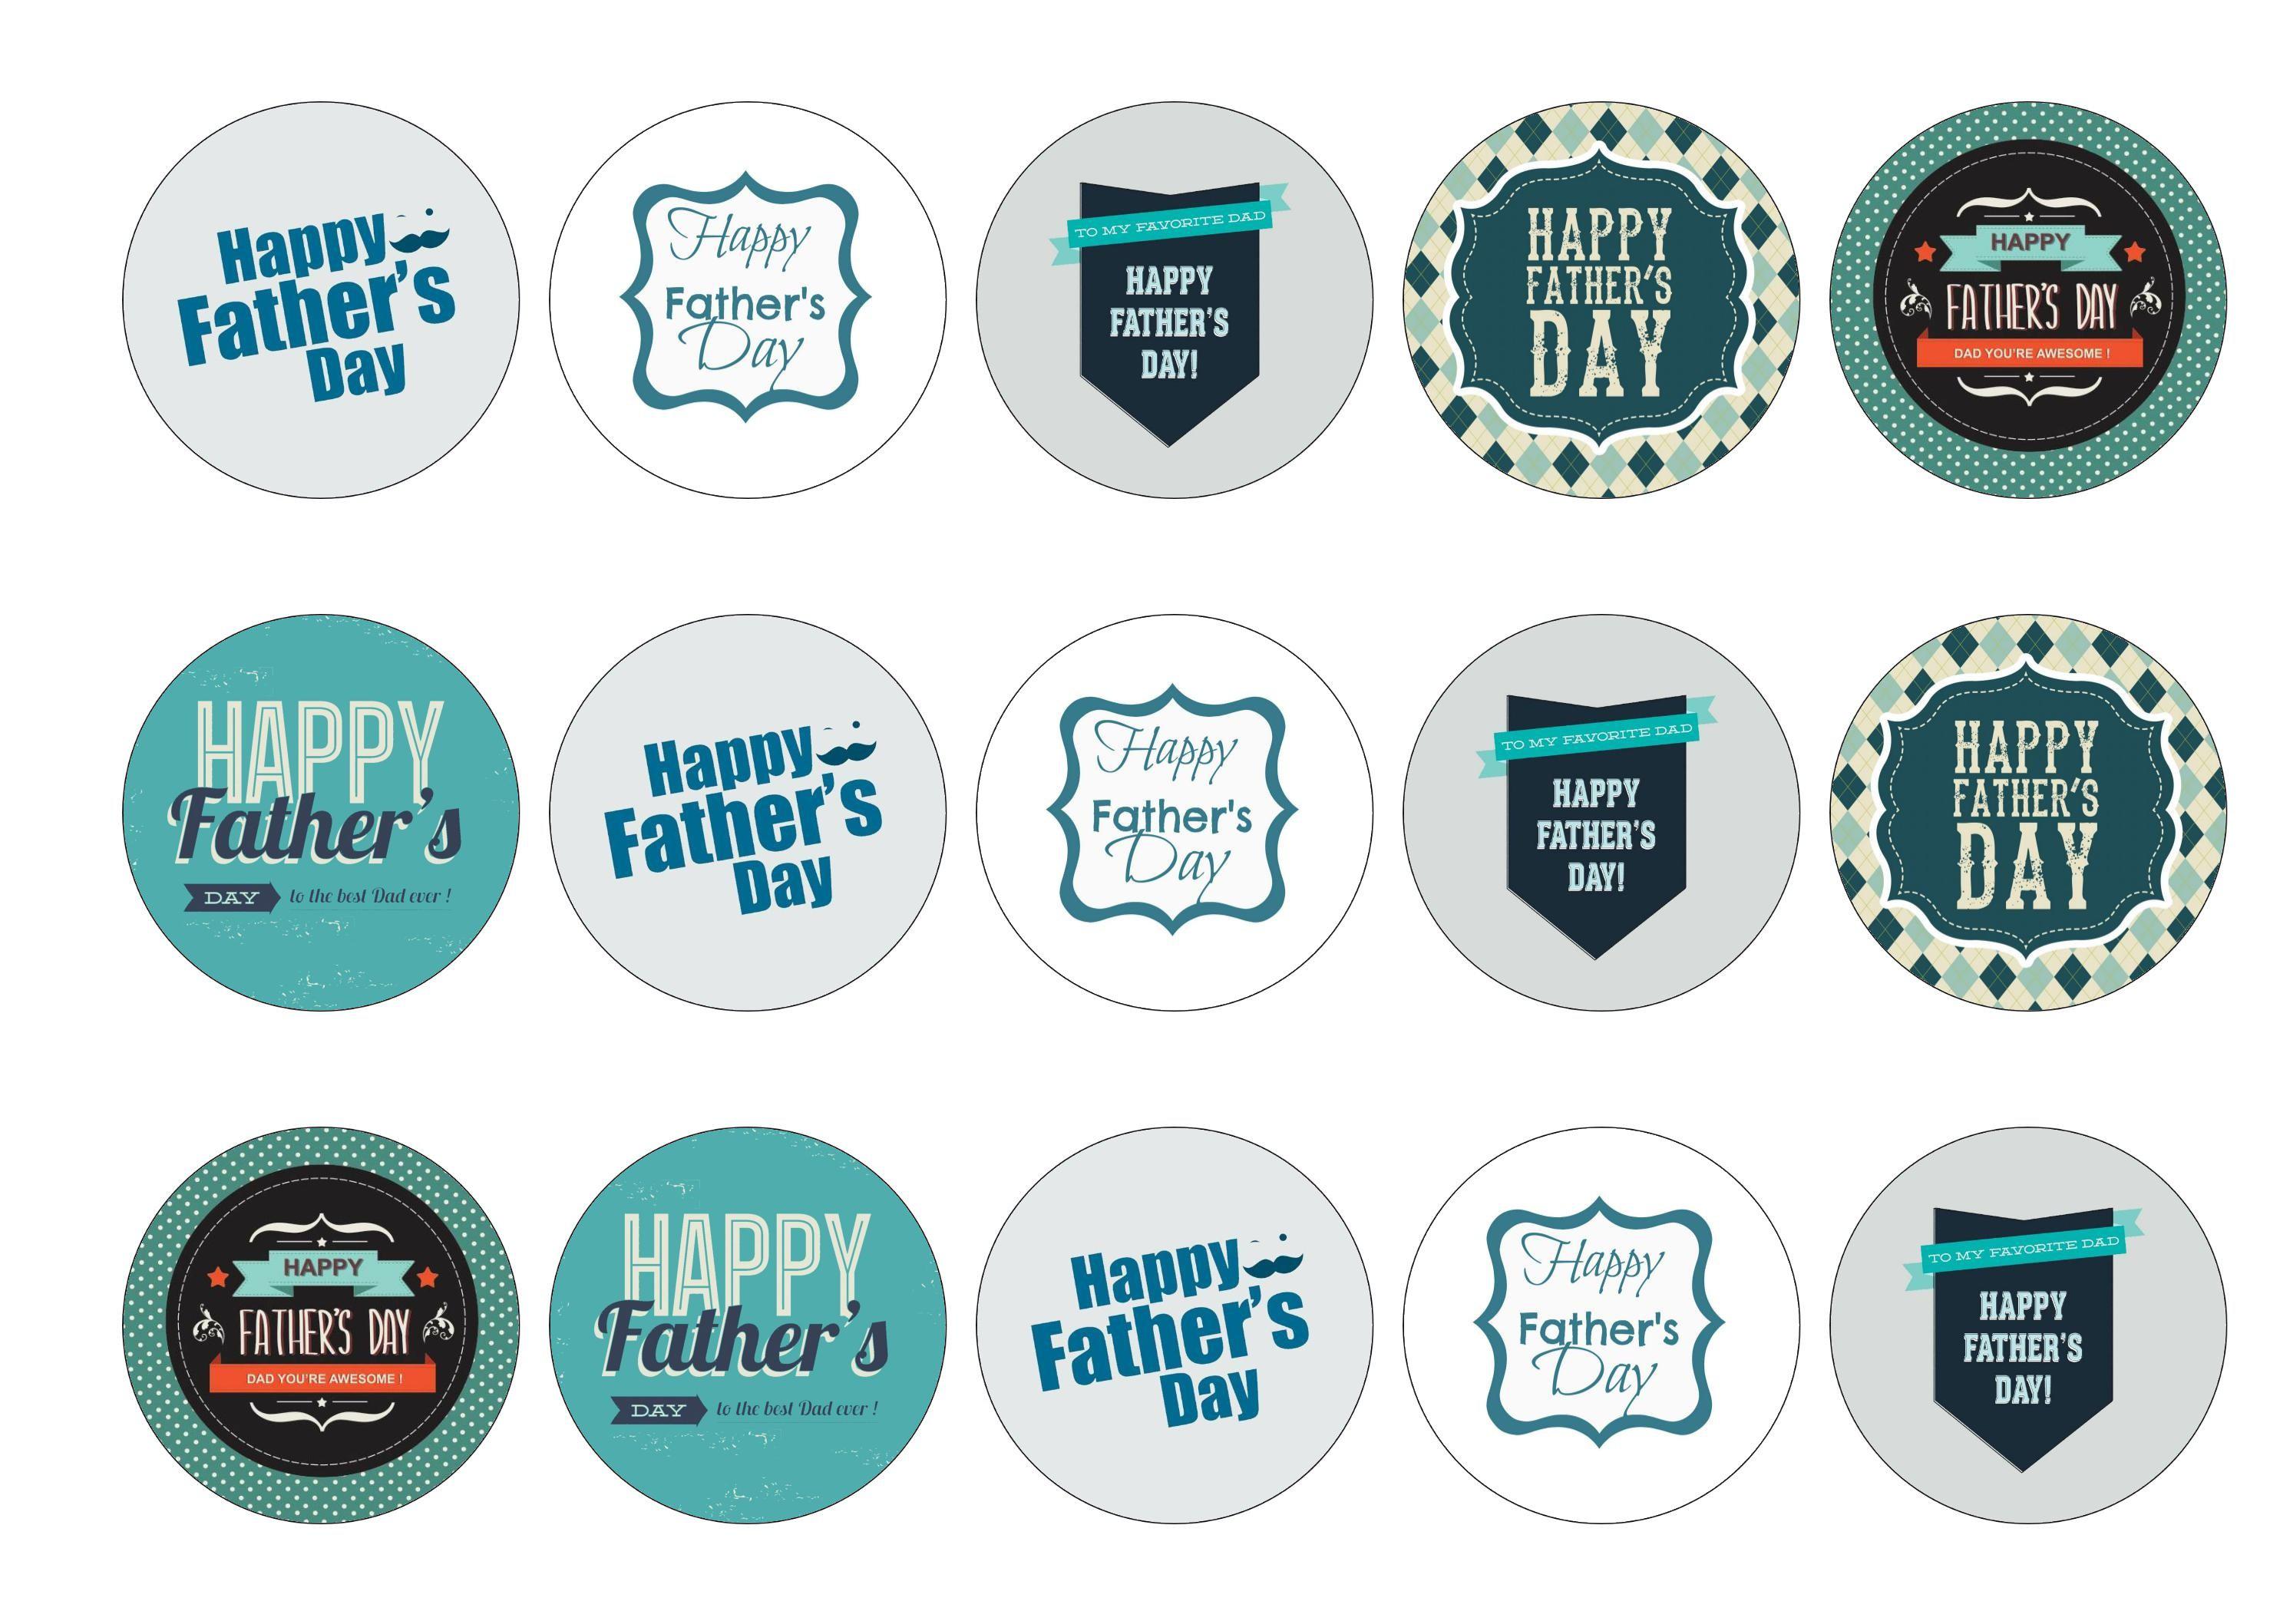 Edible printed cupcake toppers for Father's Day in shades of blue